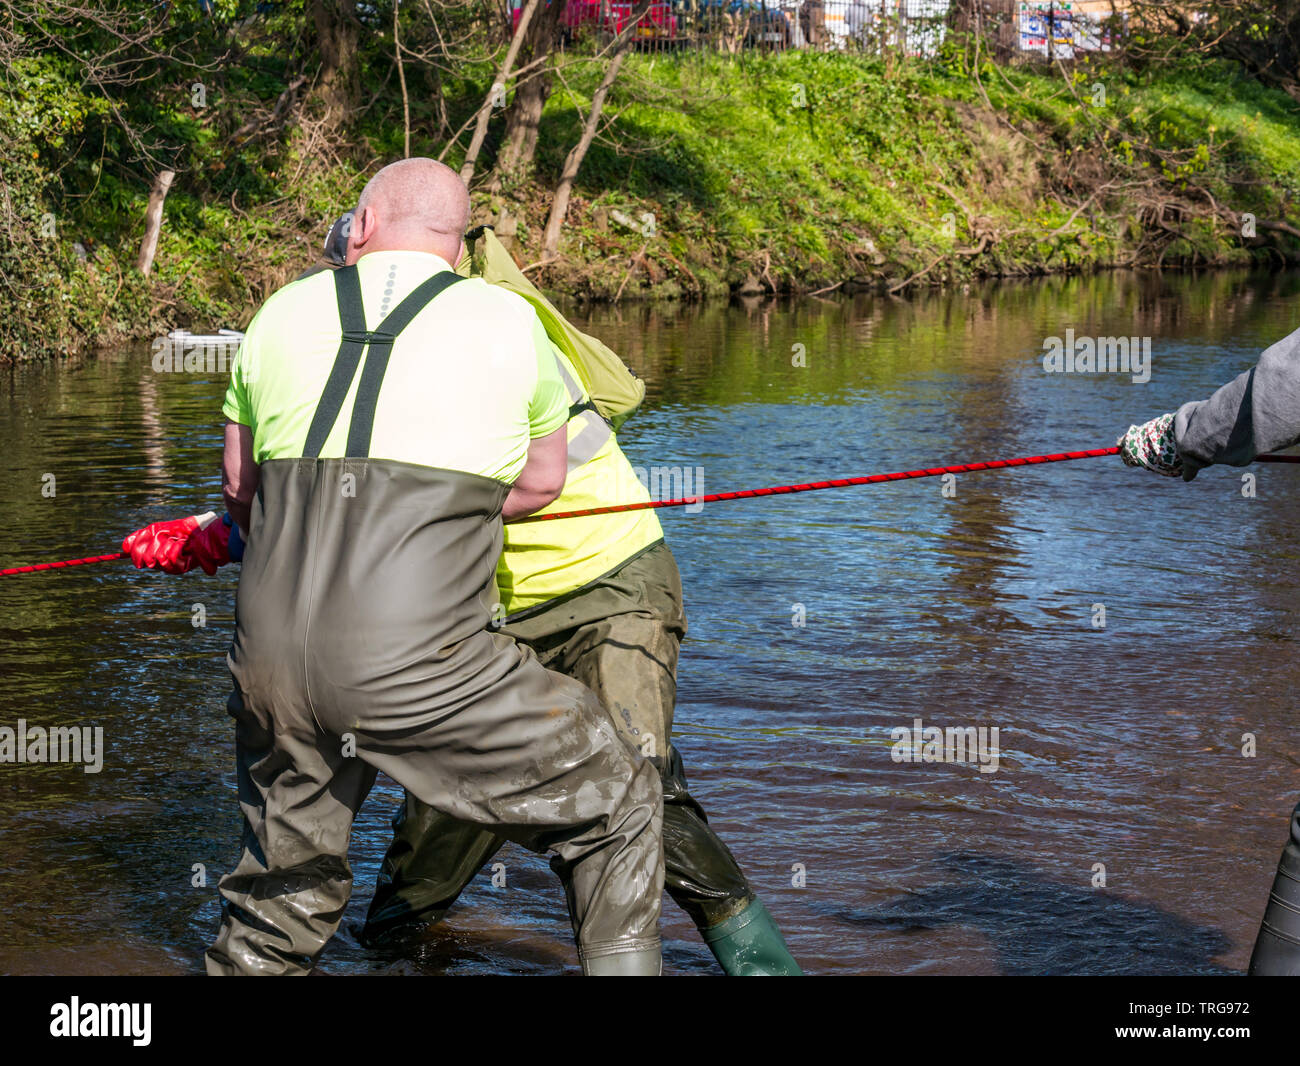 Volunteer at annual Spring clean on bank of Water of Leith, Edinburgh, Scotland, UK. Men in waders pull on a rope to retrieve rubbish Stock Photo